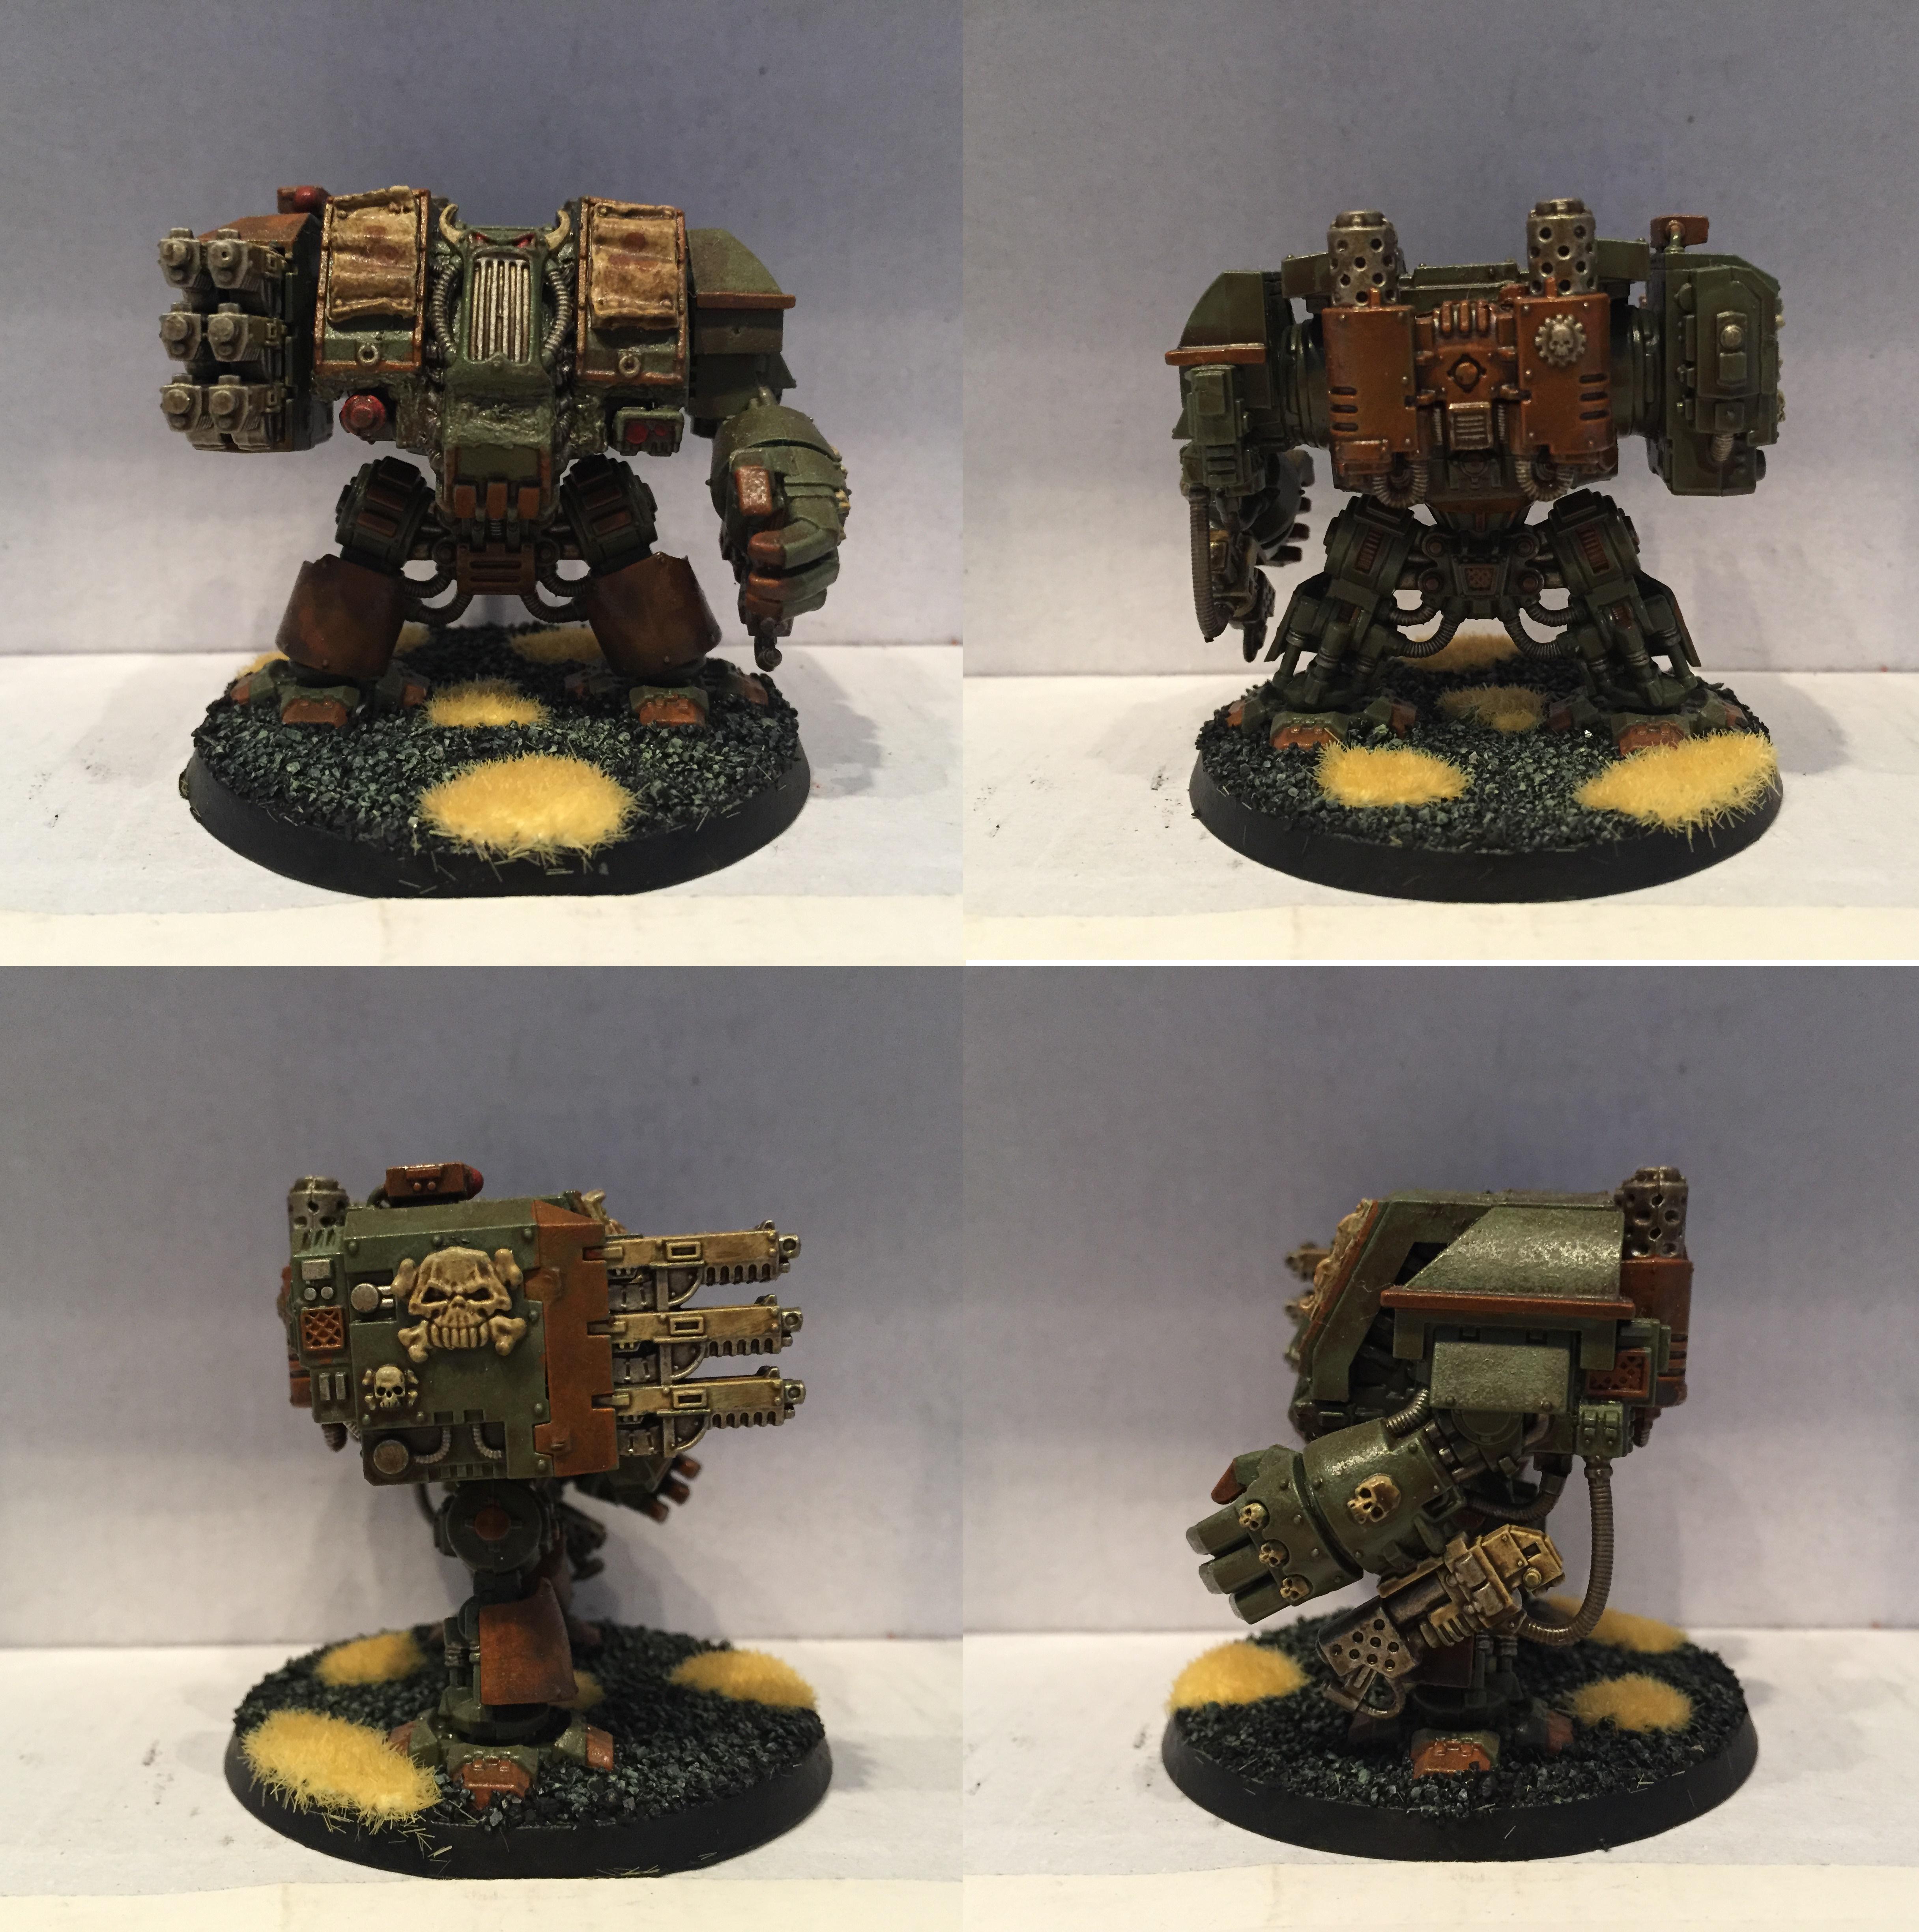 Chaos, Chaos Space Marines, Conversion, Dipped, Dreadnought, Nurgle, Petrifications, Warhammer 40,000